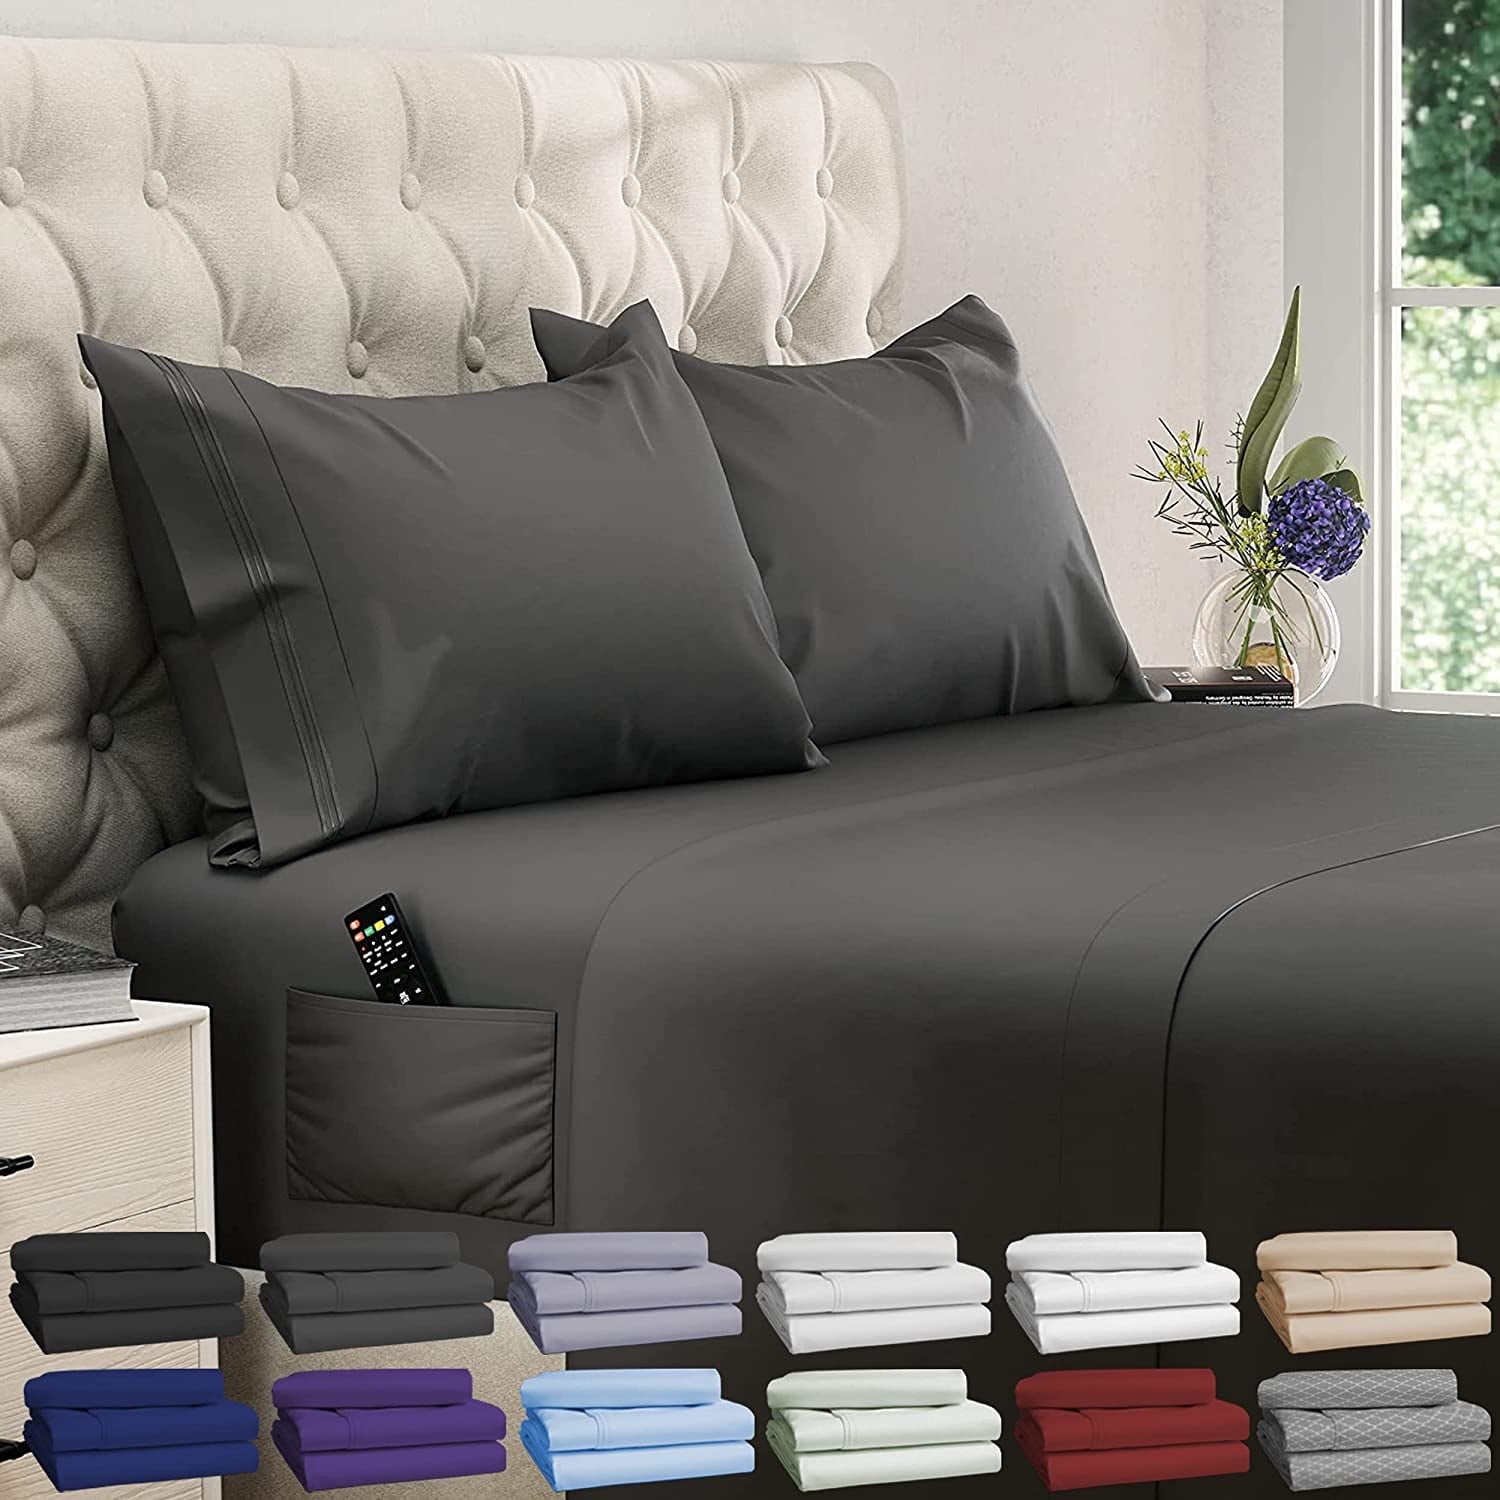 DREAMCARE - Bed Sheets Set - Queen Size Sheet with Side Pocket